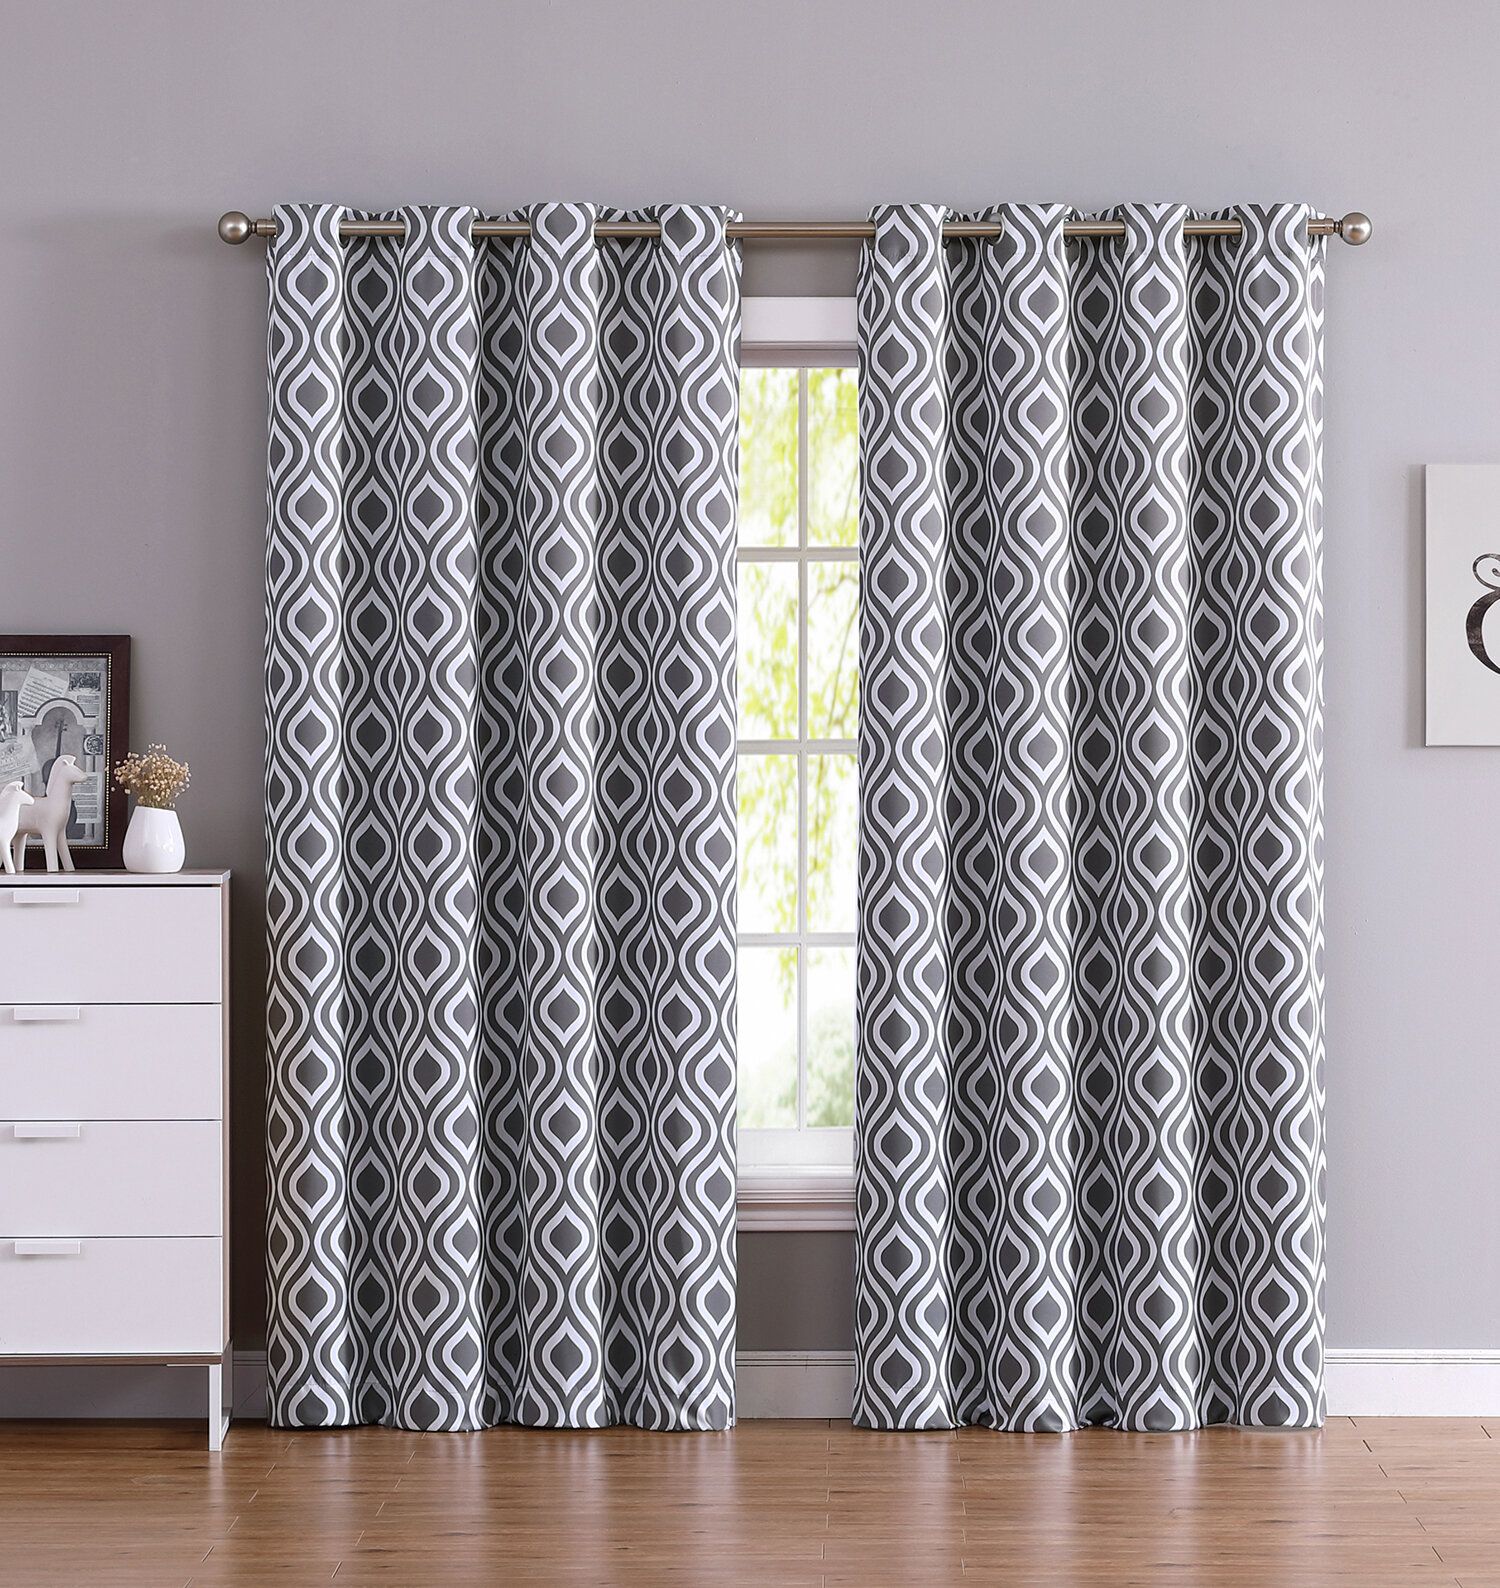 Wirtz Trellis Print Geometric Blackout Thermal Grommet Curtain Panels In Woven Blackout Curtain Panel Pairs With Grommet Top (View 29 of 30)